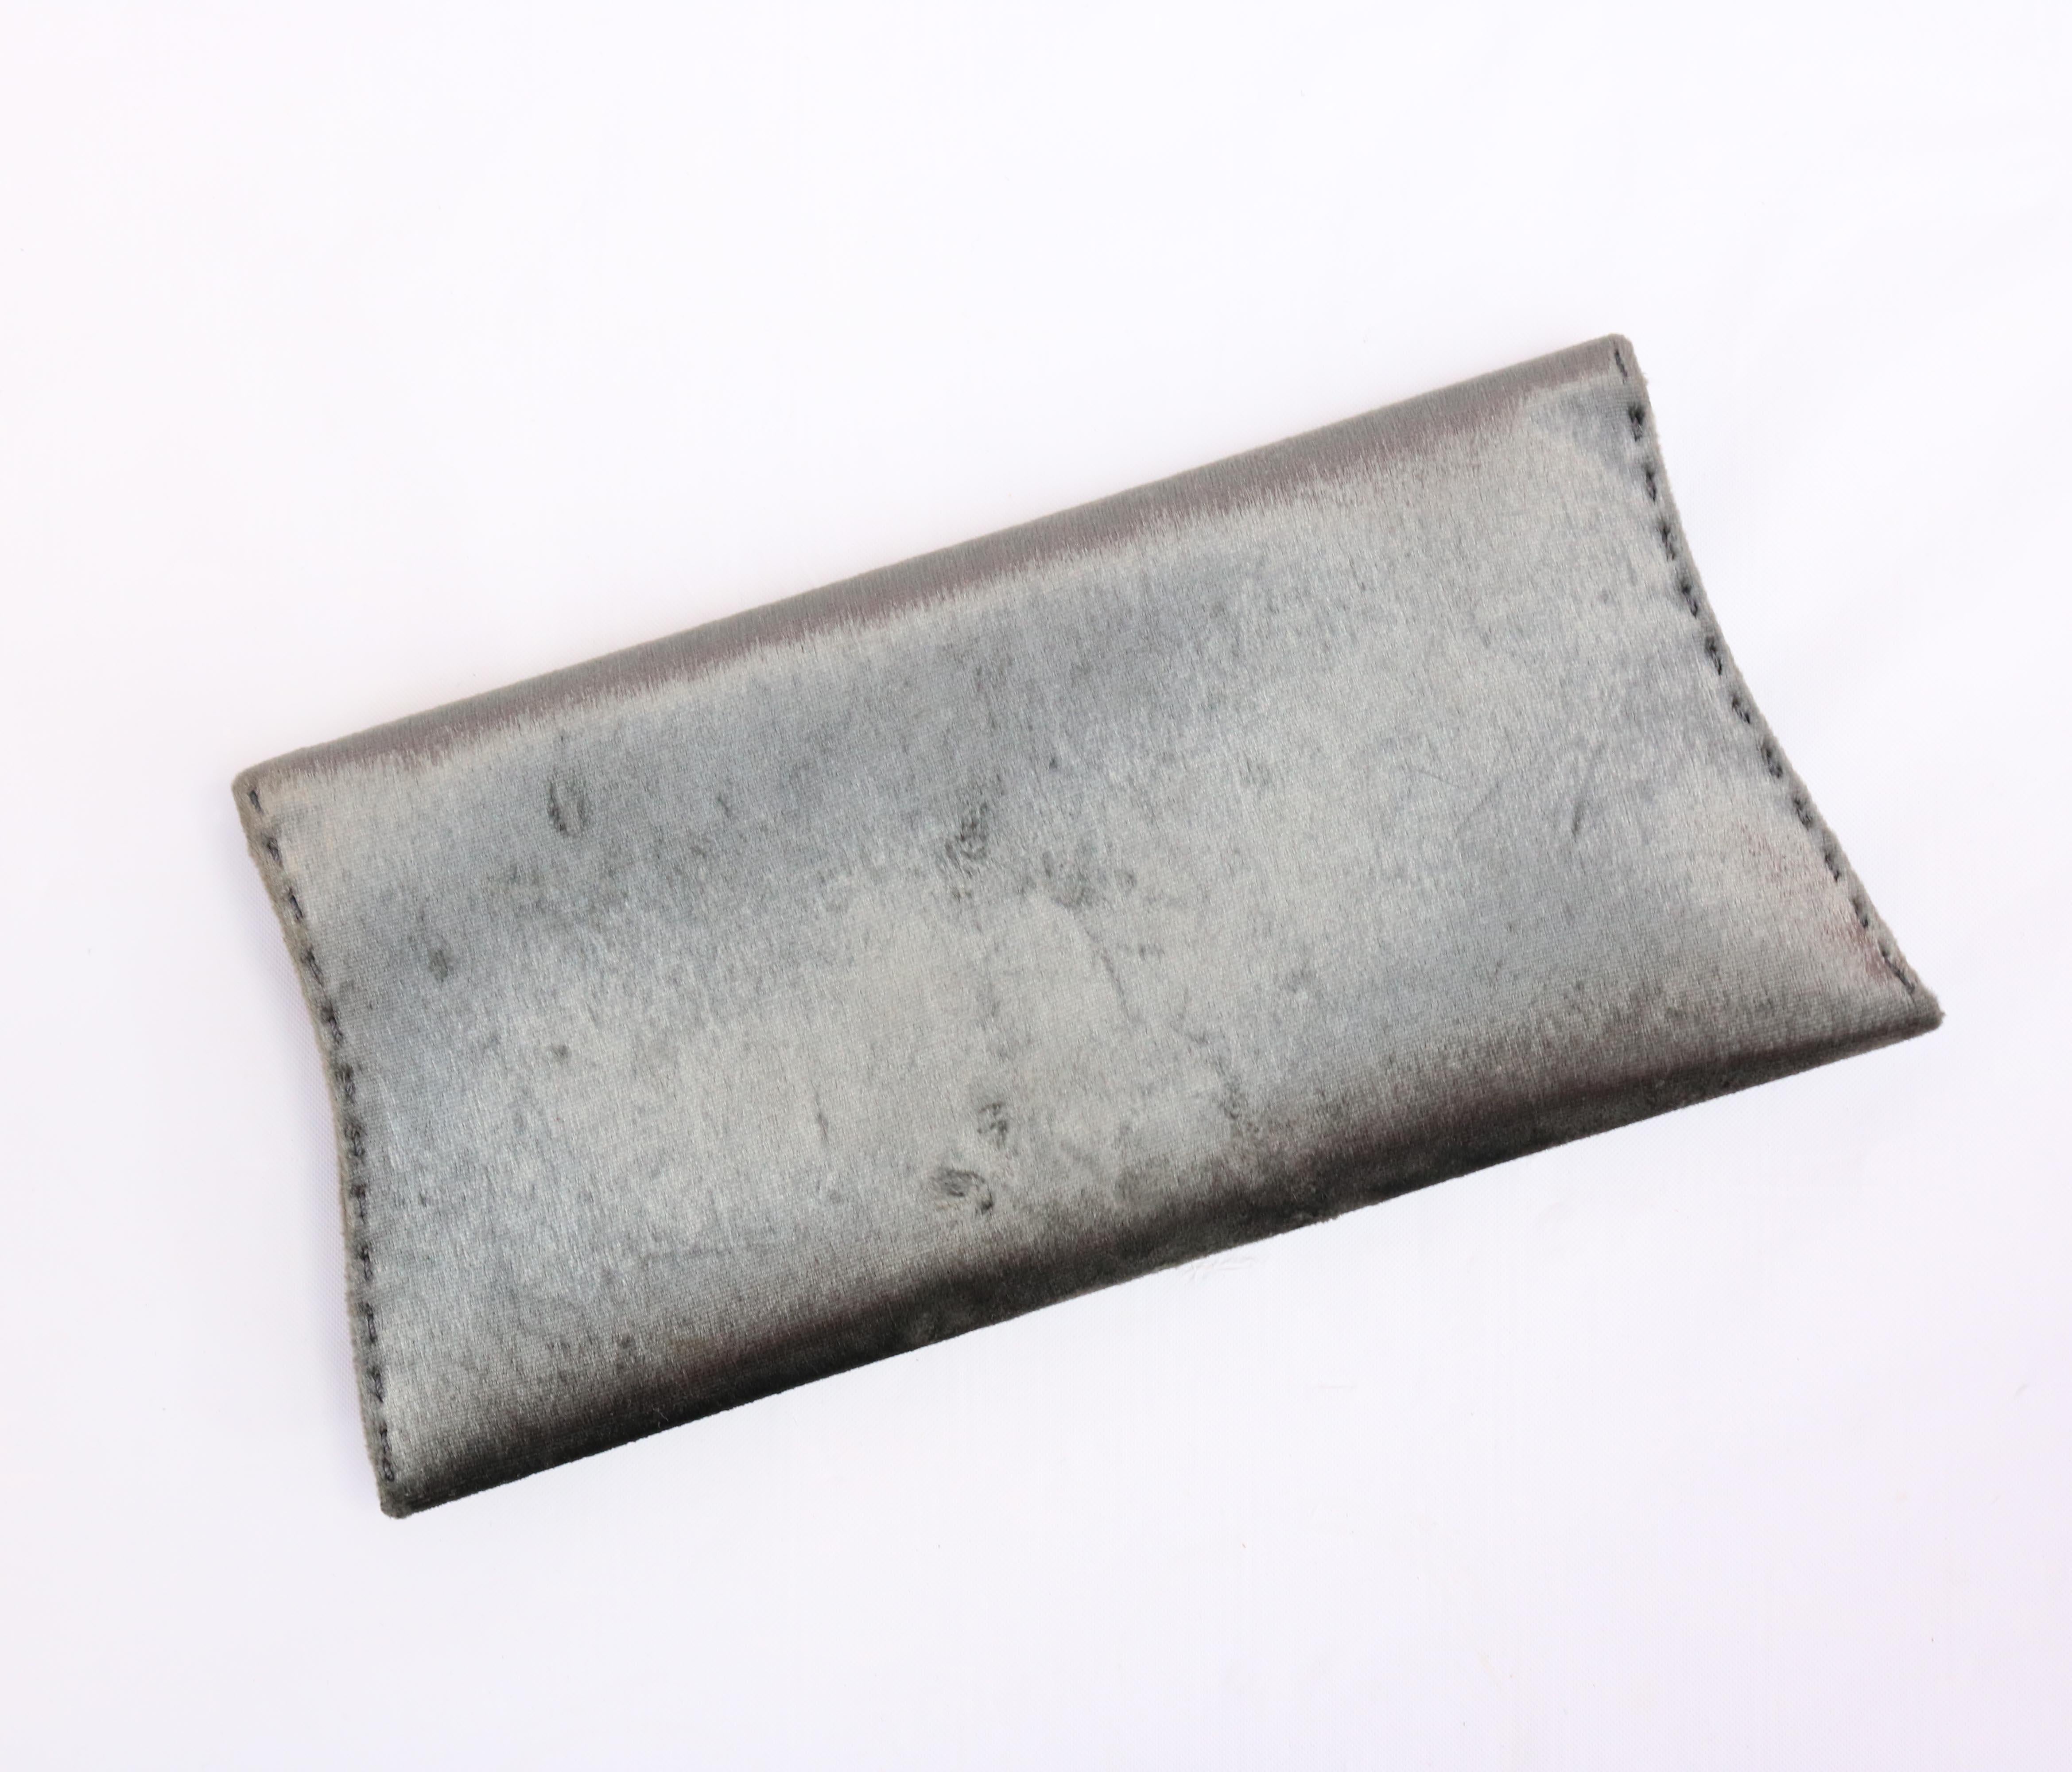 VBH Manila Stretch Silver Clutch 
Mint Condition. 
Suede Interior with no signs of wear. 

V.B.H. is an Italian luxury accessories house, the core of which is a line of men's and women's luxury leather bags along with a collection of fine jewelry